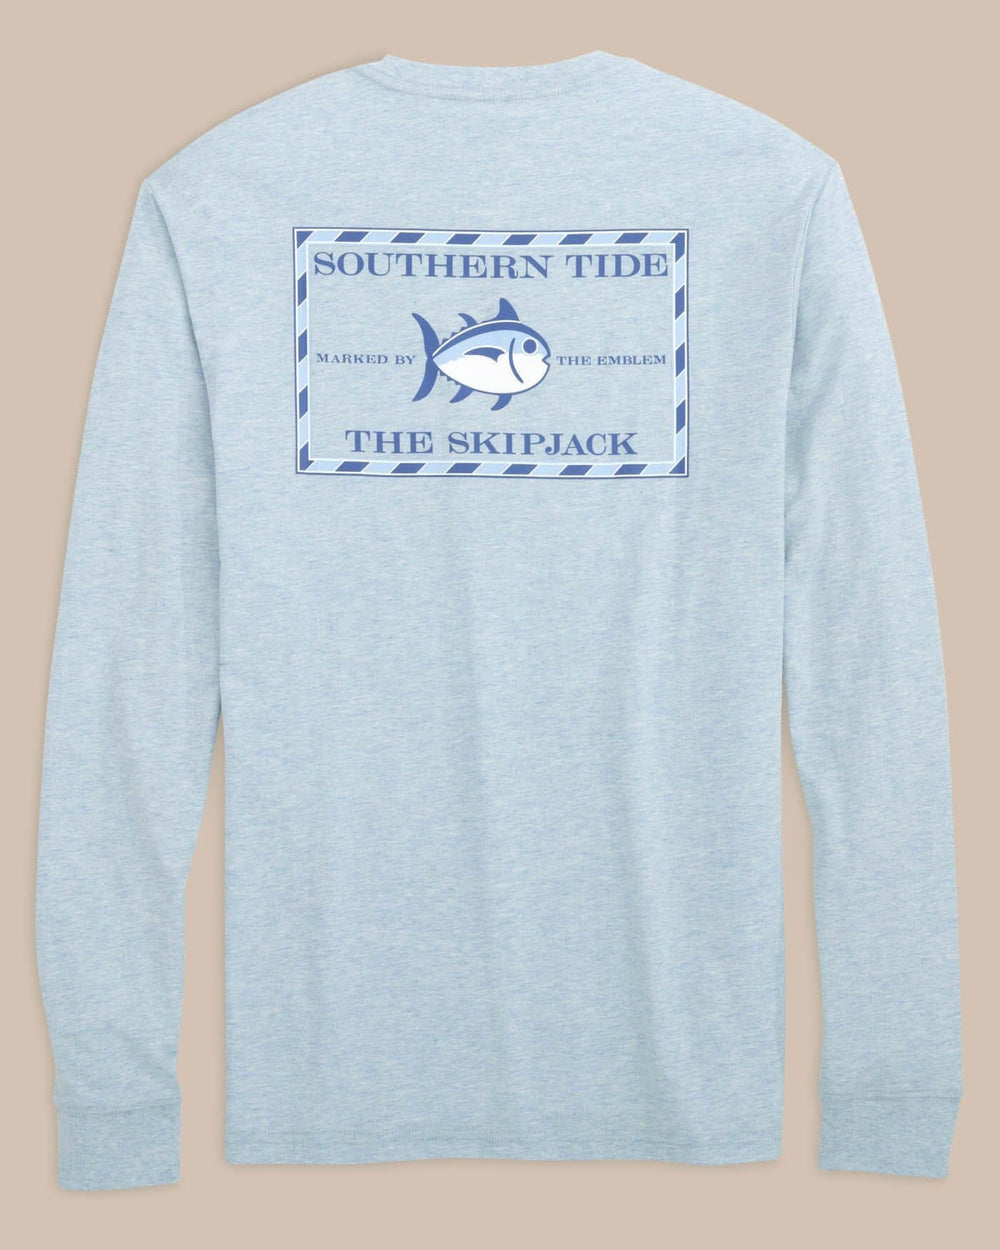 The back view of the Southern Tide Heather Original Skipjack Long Sleeve T-shirt by Southern Tide - Heather Dream Blue